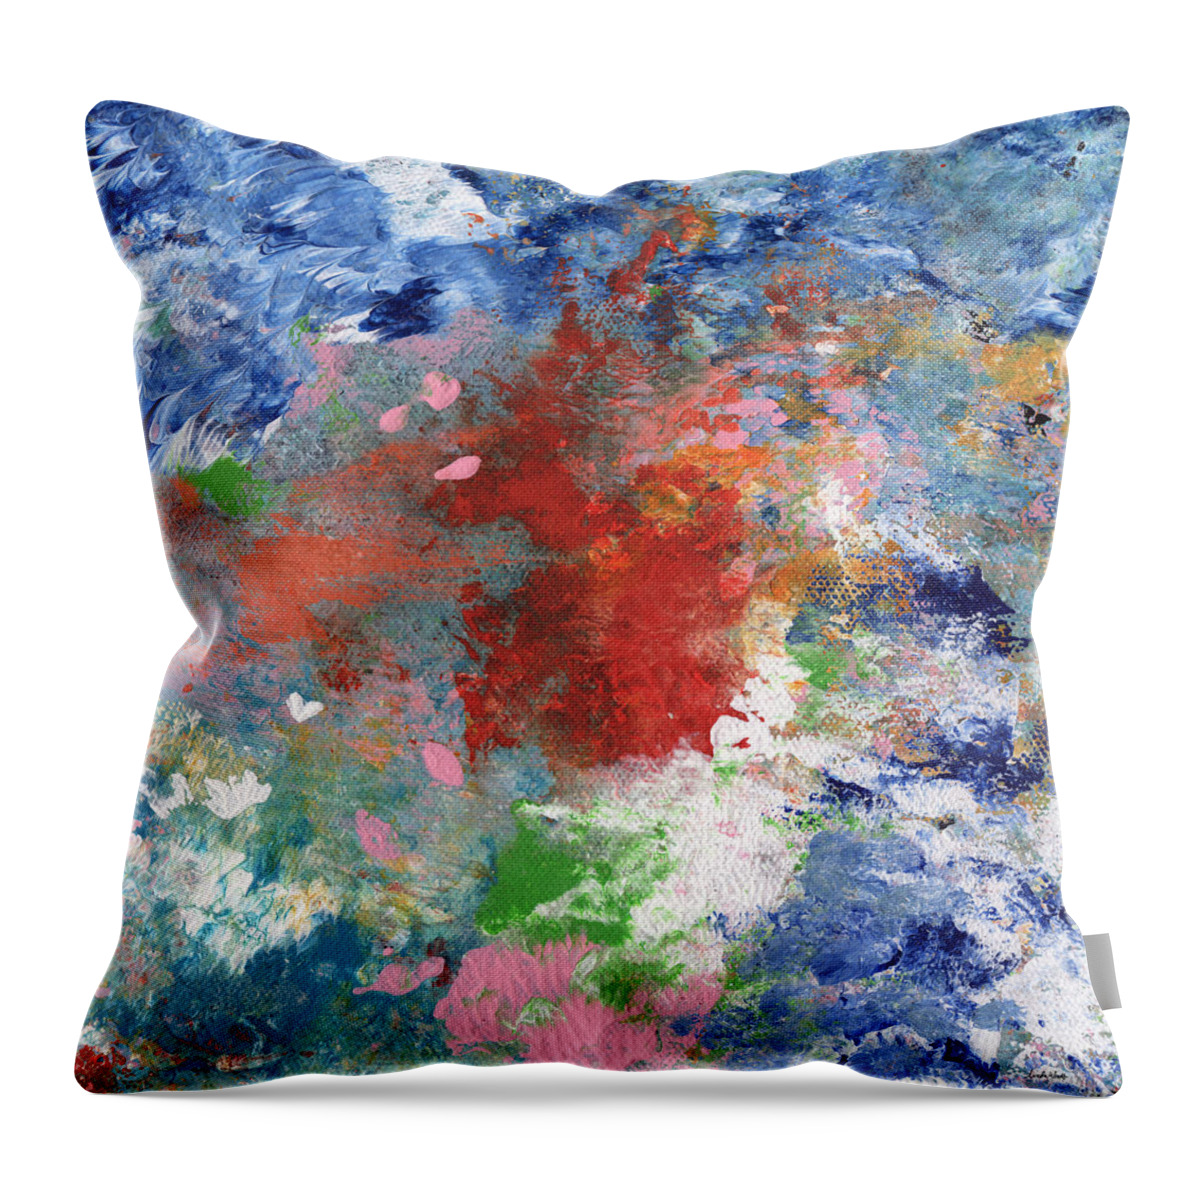 Expressionist Throw Pillow featuring the painting Holding On- Abstract Art by Linda Woods by Linda Woods